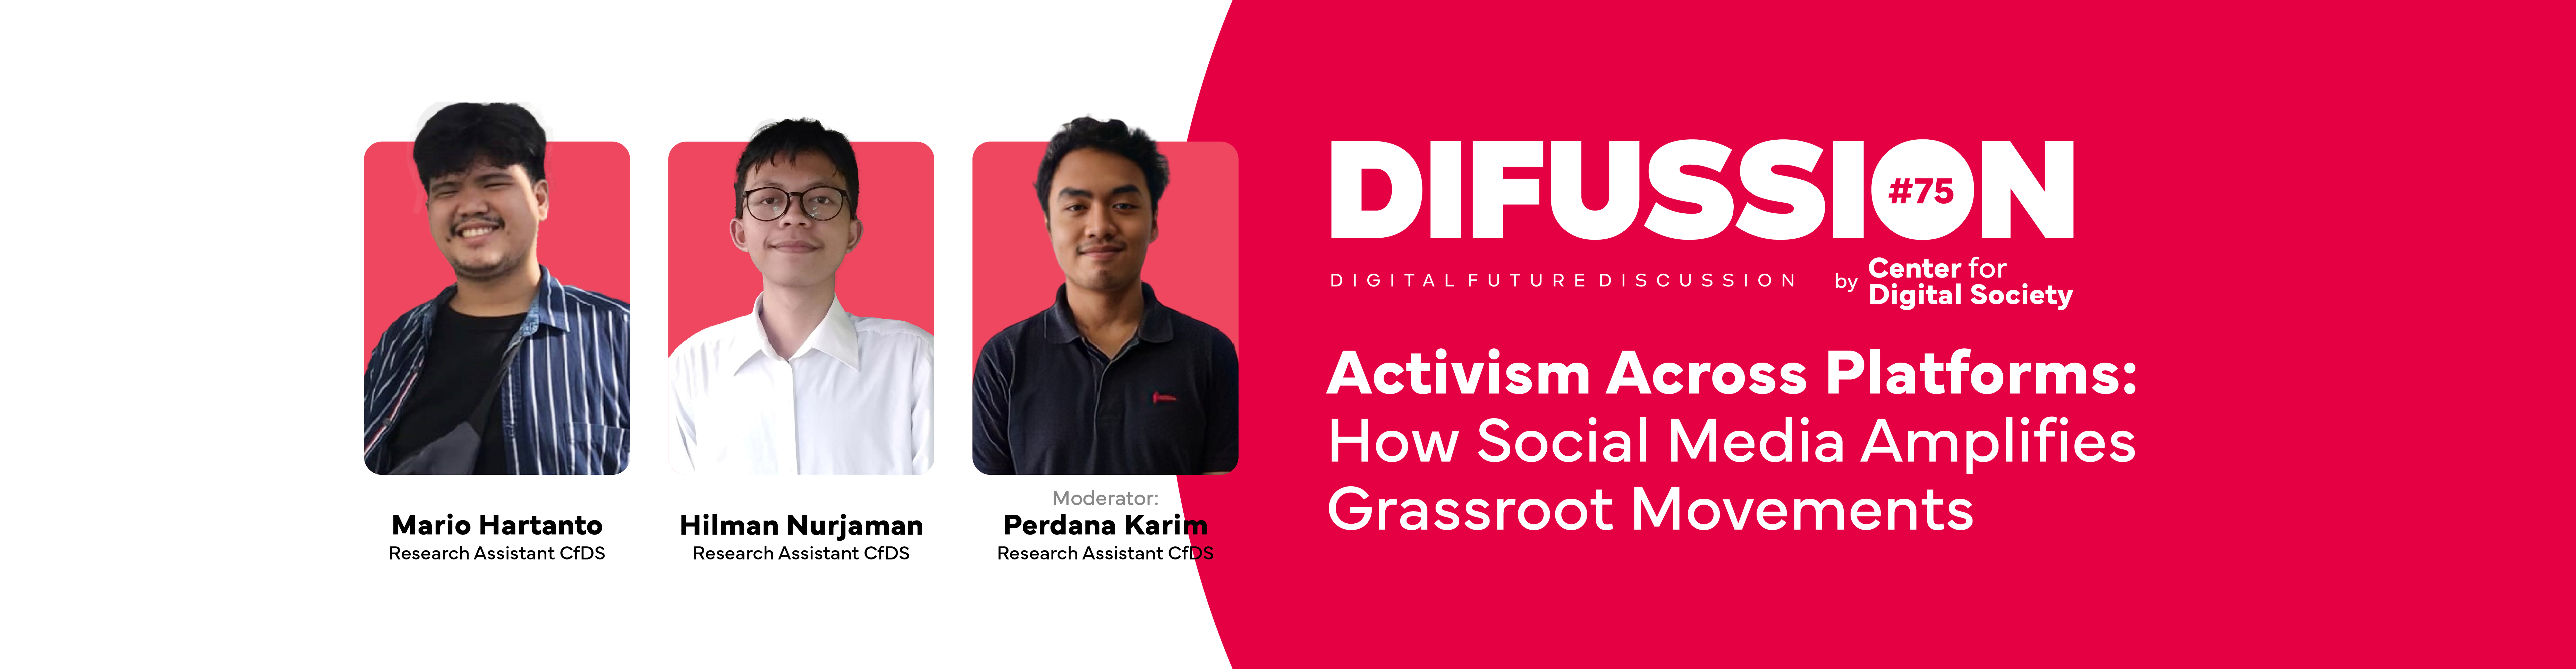 [PRESS RELEASE] Activism Across Platforms: How Social Media Amplifies Grassroot Movements | Difussion #75